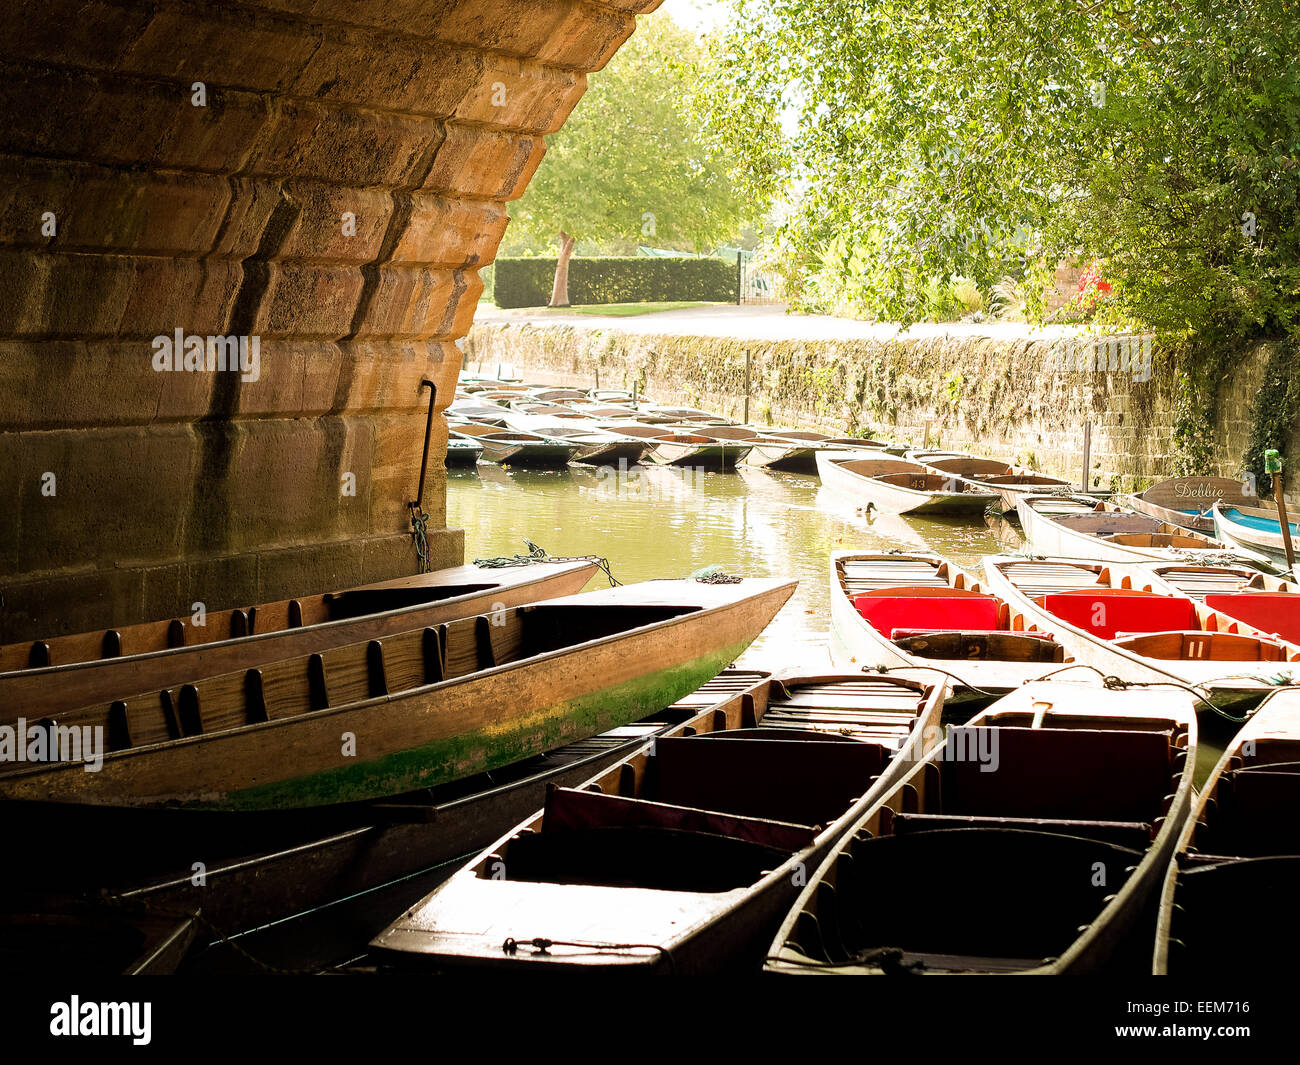 UK, England, Oxford, View of punting boats Stock Photo